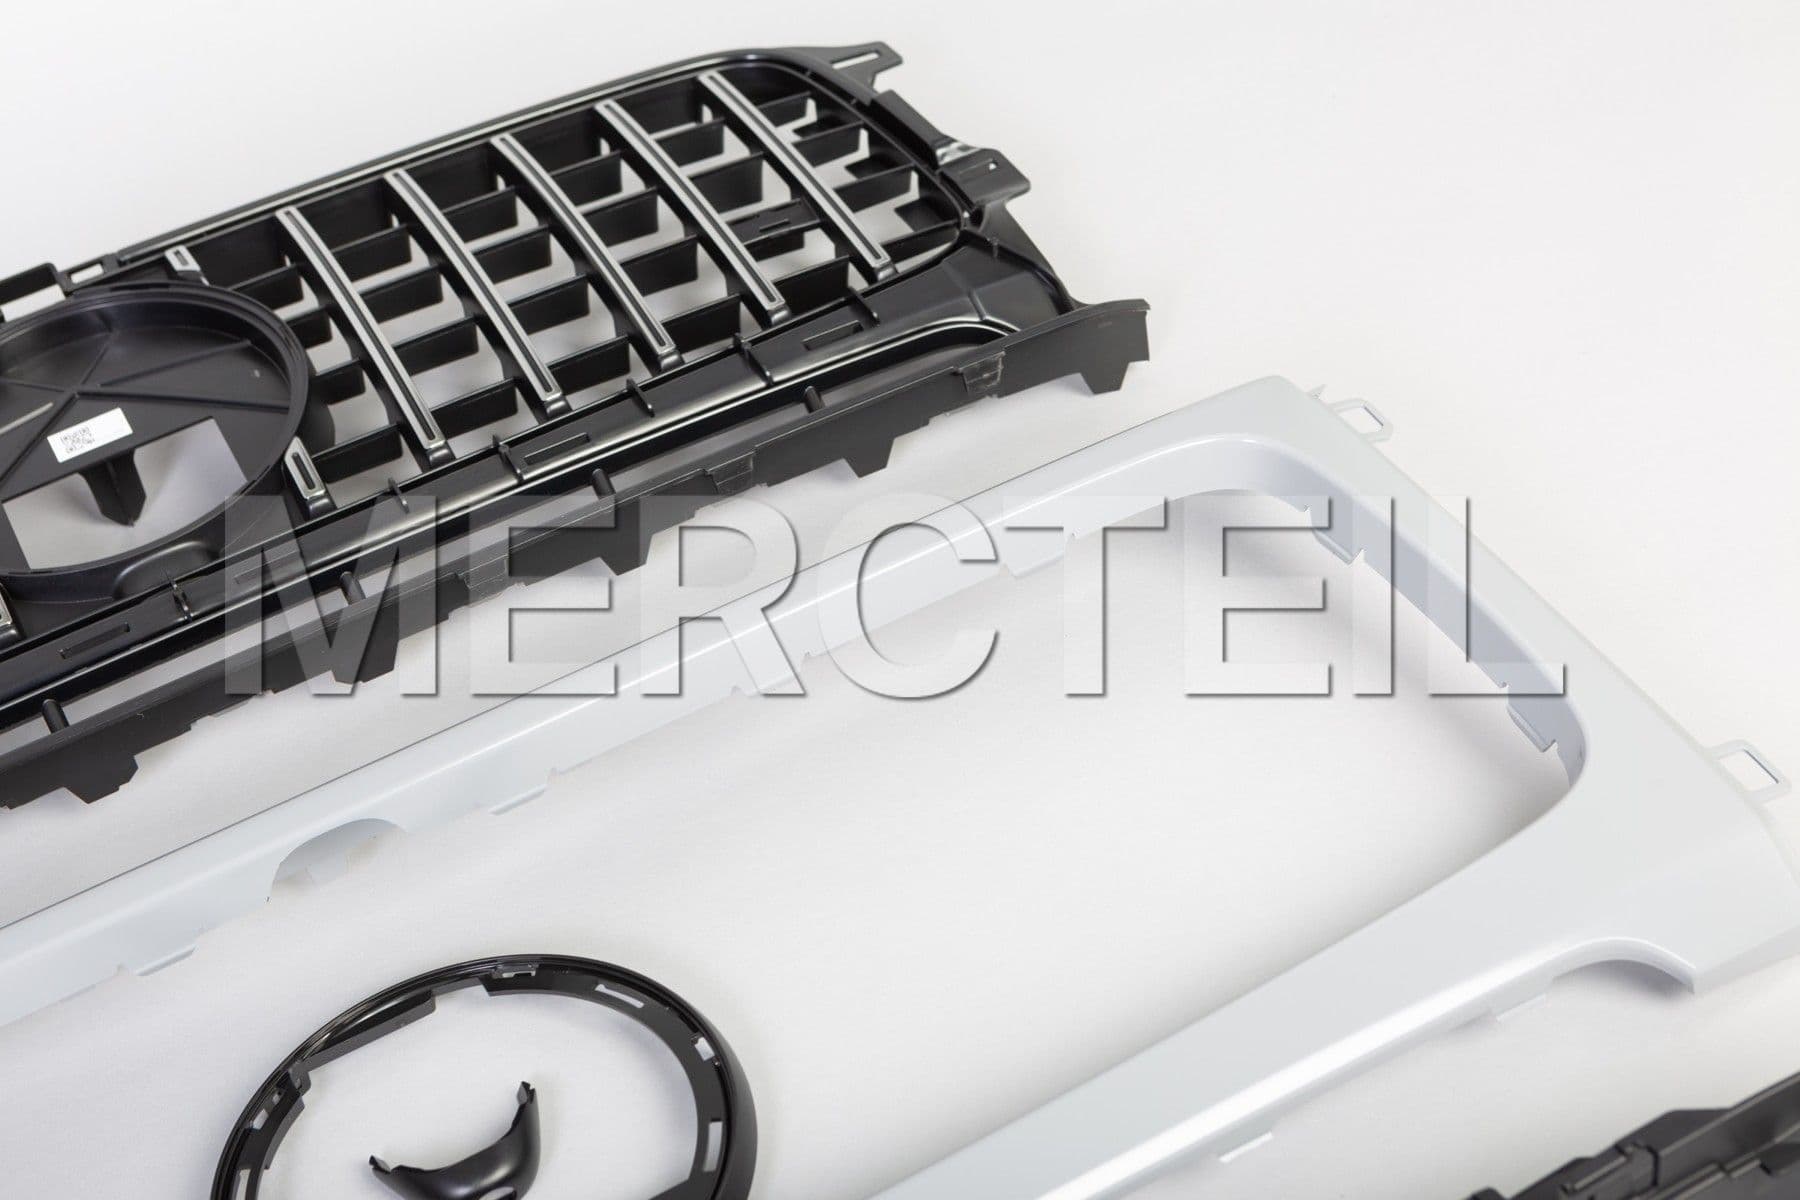 G63 AMG Panamericana Radiator Grill Genuine Mercedes AMG (part number: 
A46388852009999)